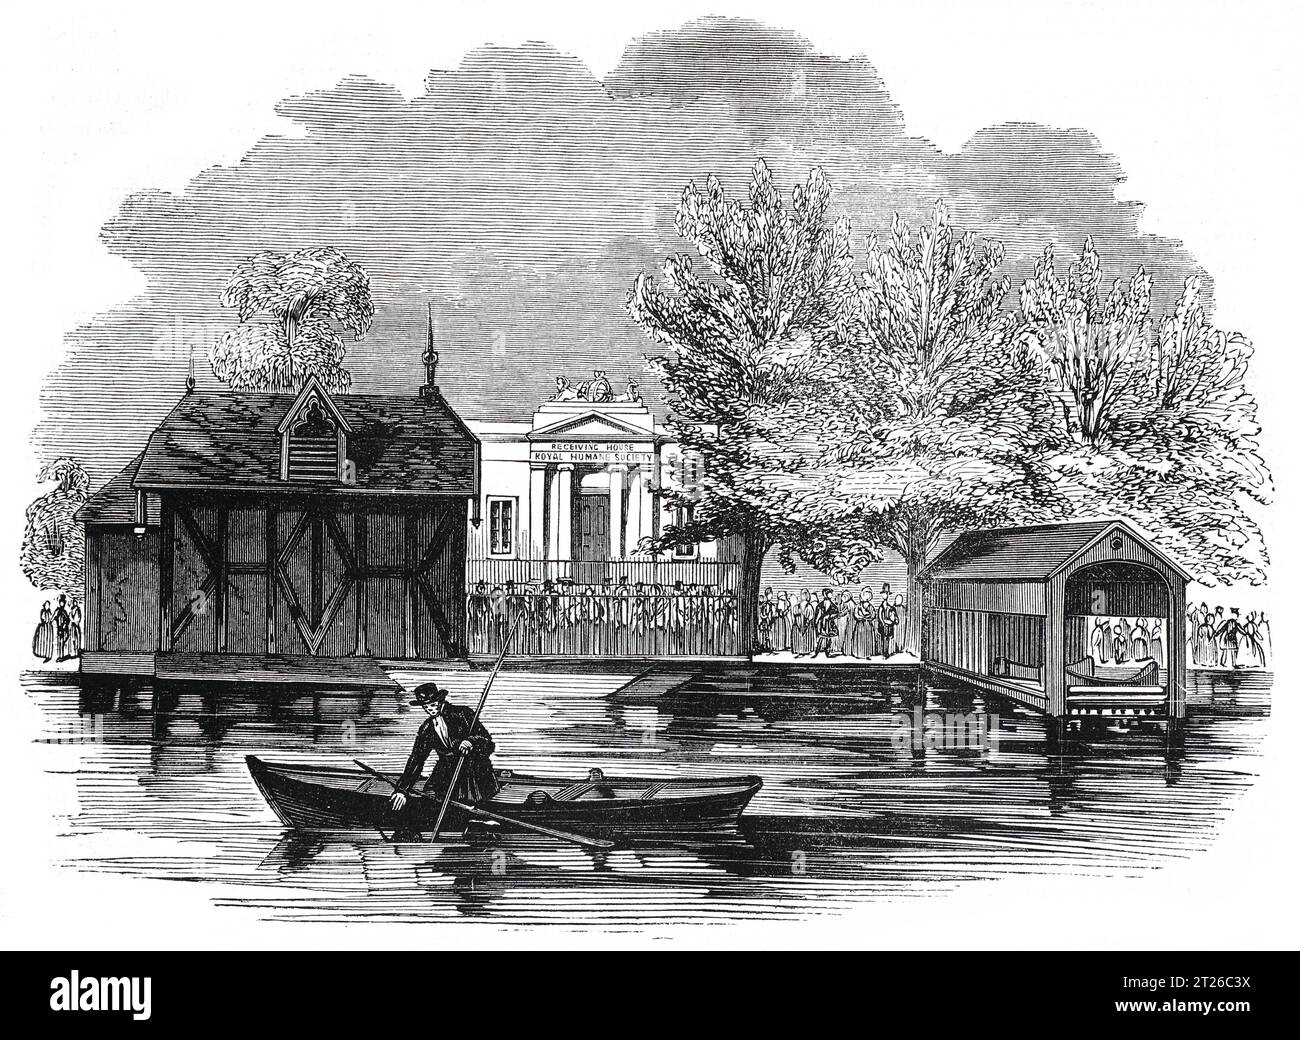 Receiving House della Royal Humane Society, Hyde Park, Londra. Black and White Illustration from the 'Old England' pubblicato da James Sangster nel 1860. Foto Stock